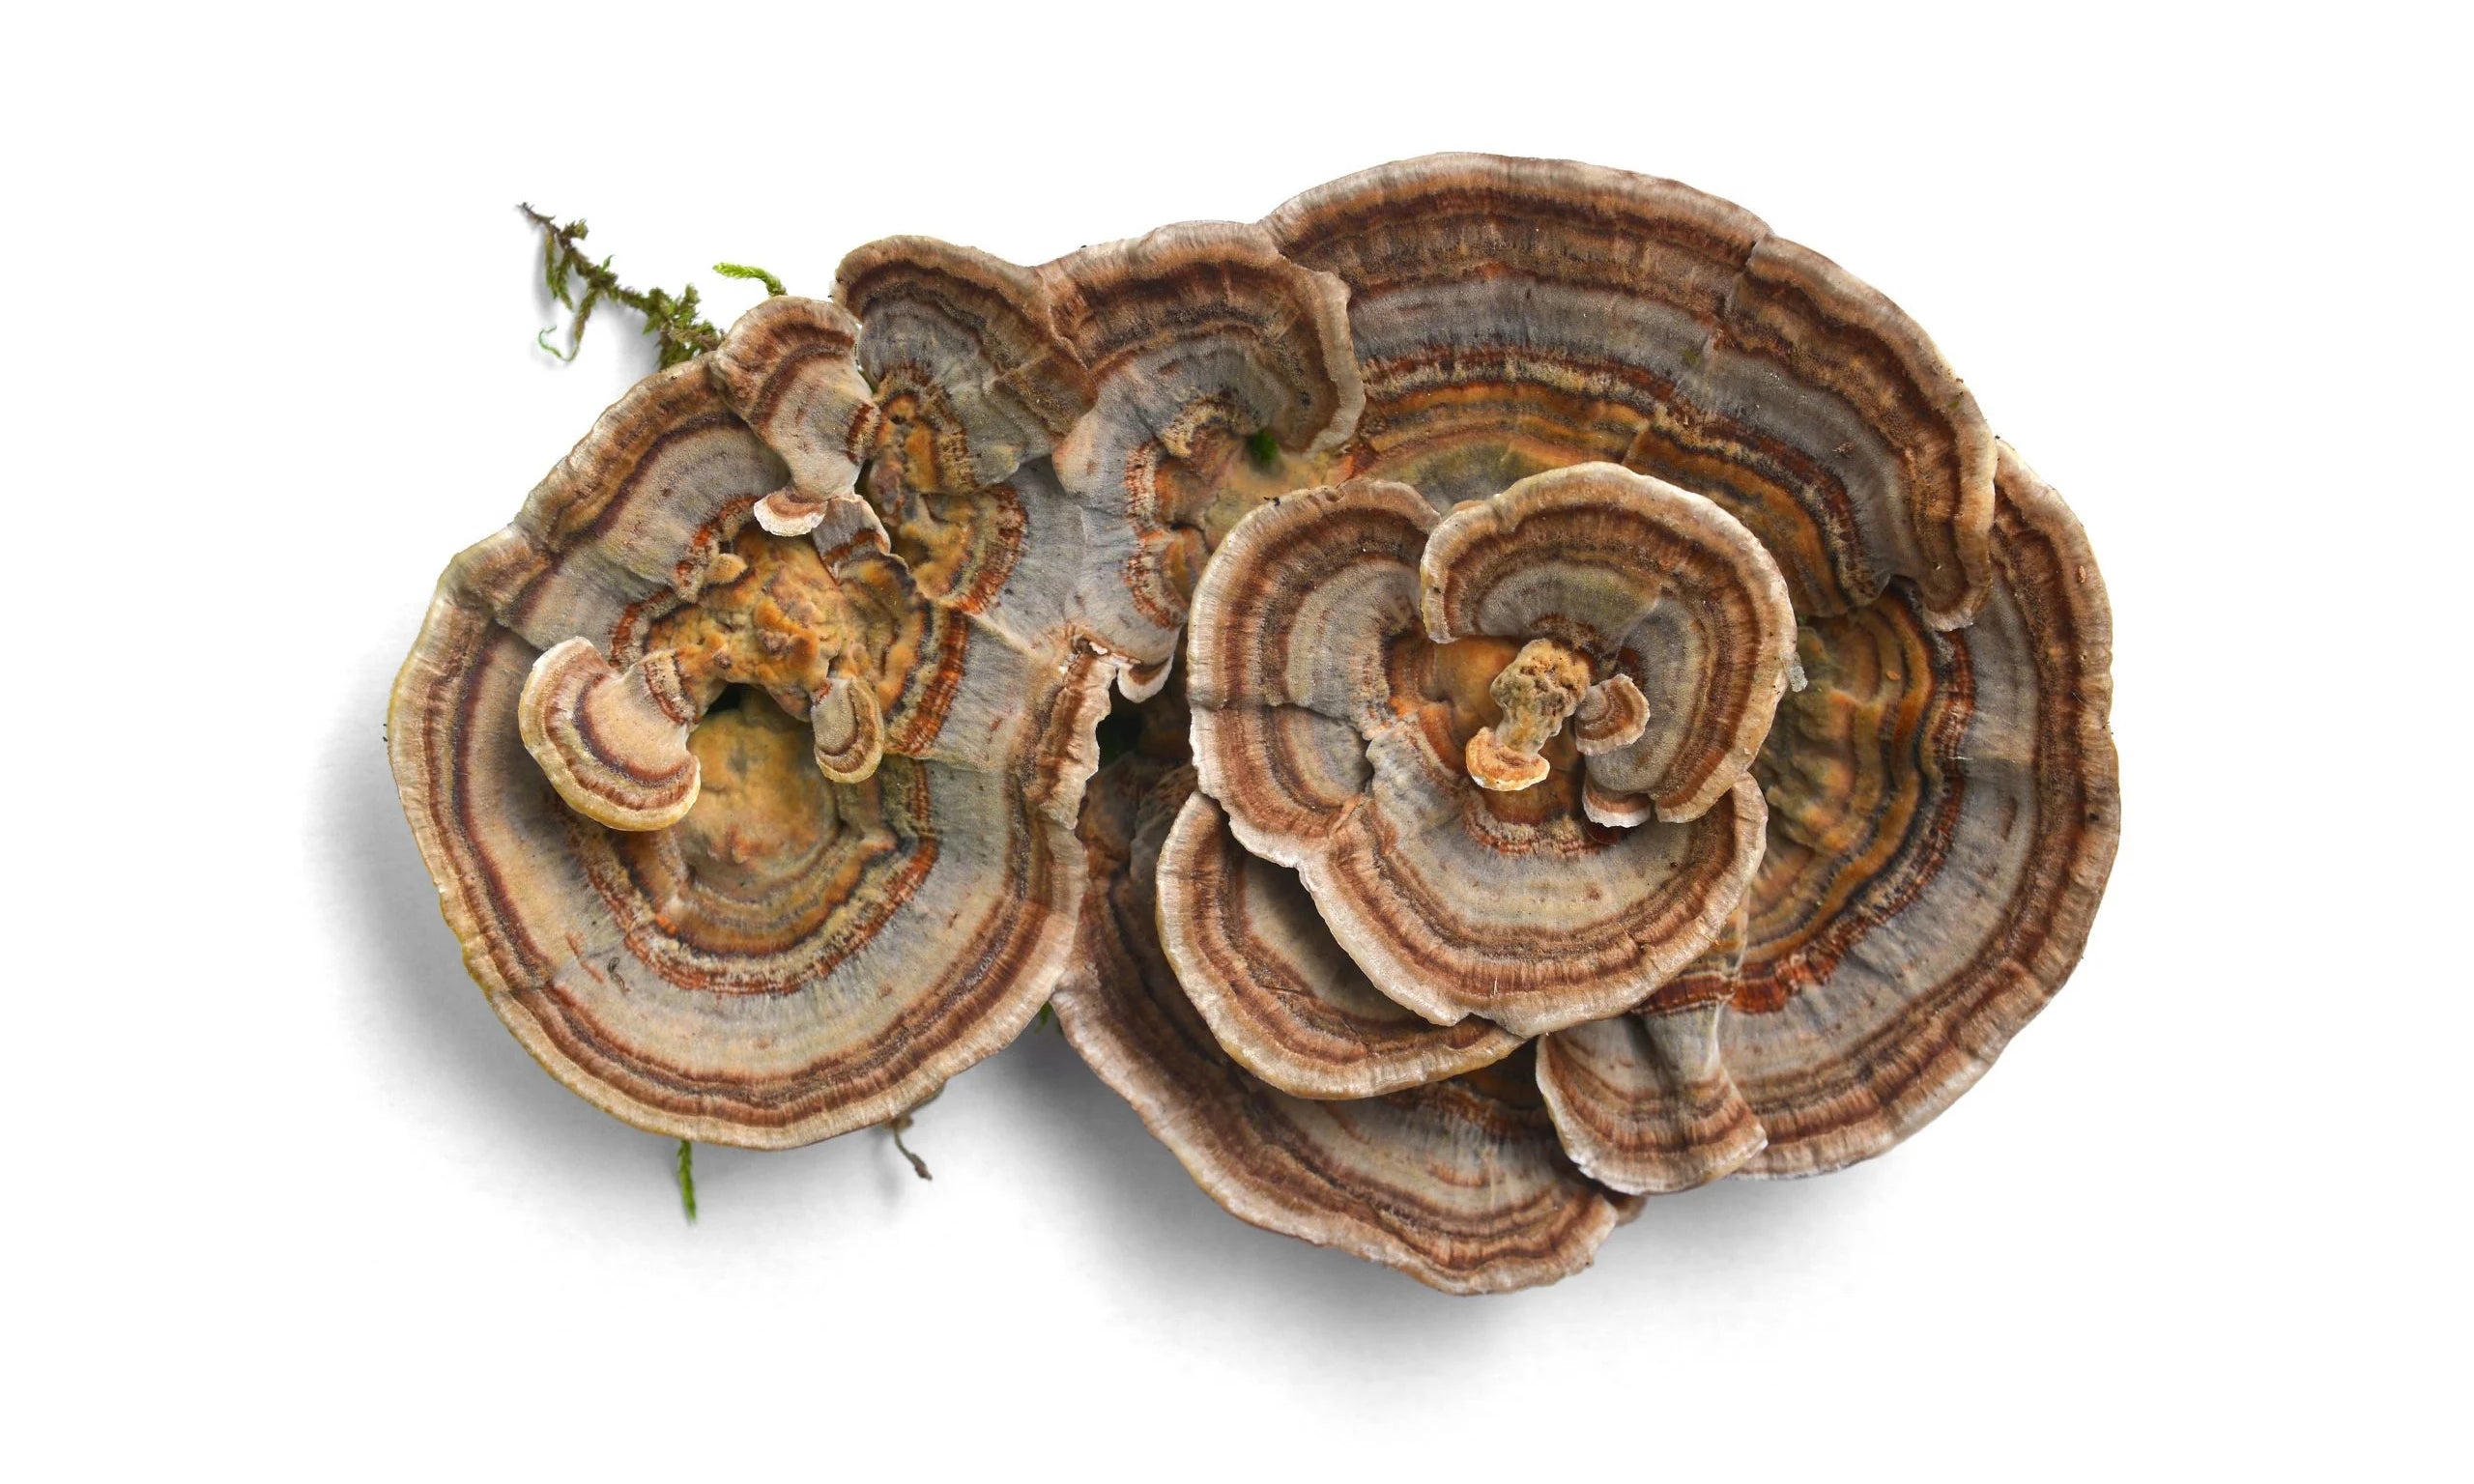 What are the main benefits of supplementing with Turkey Tail Mushrooms?